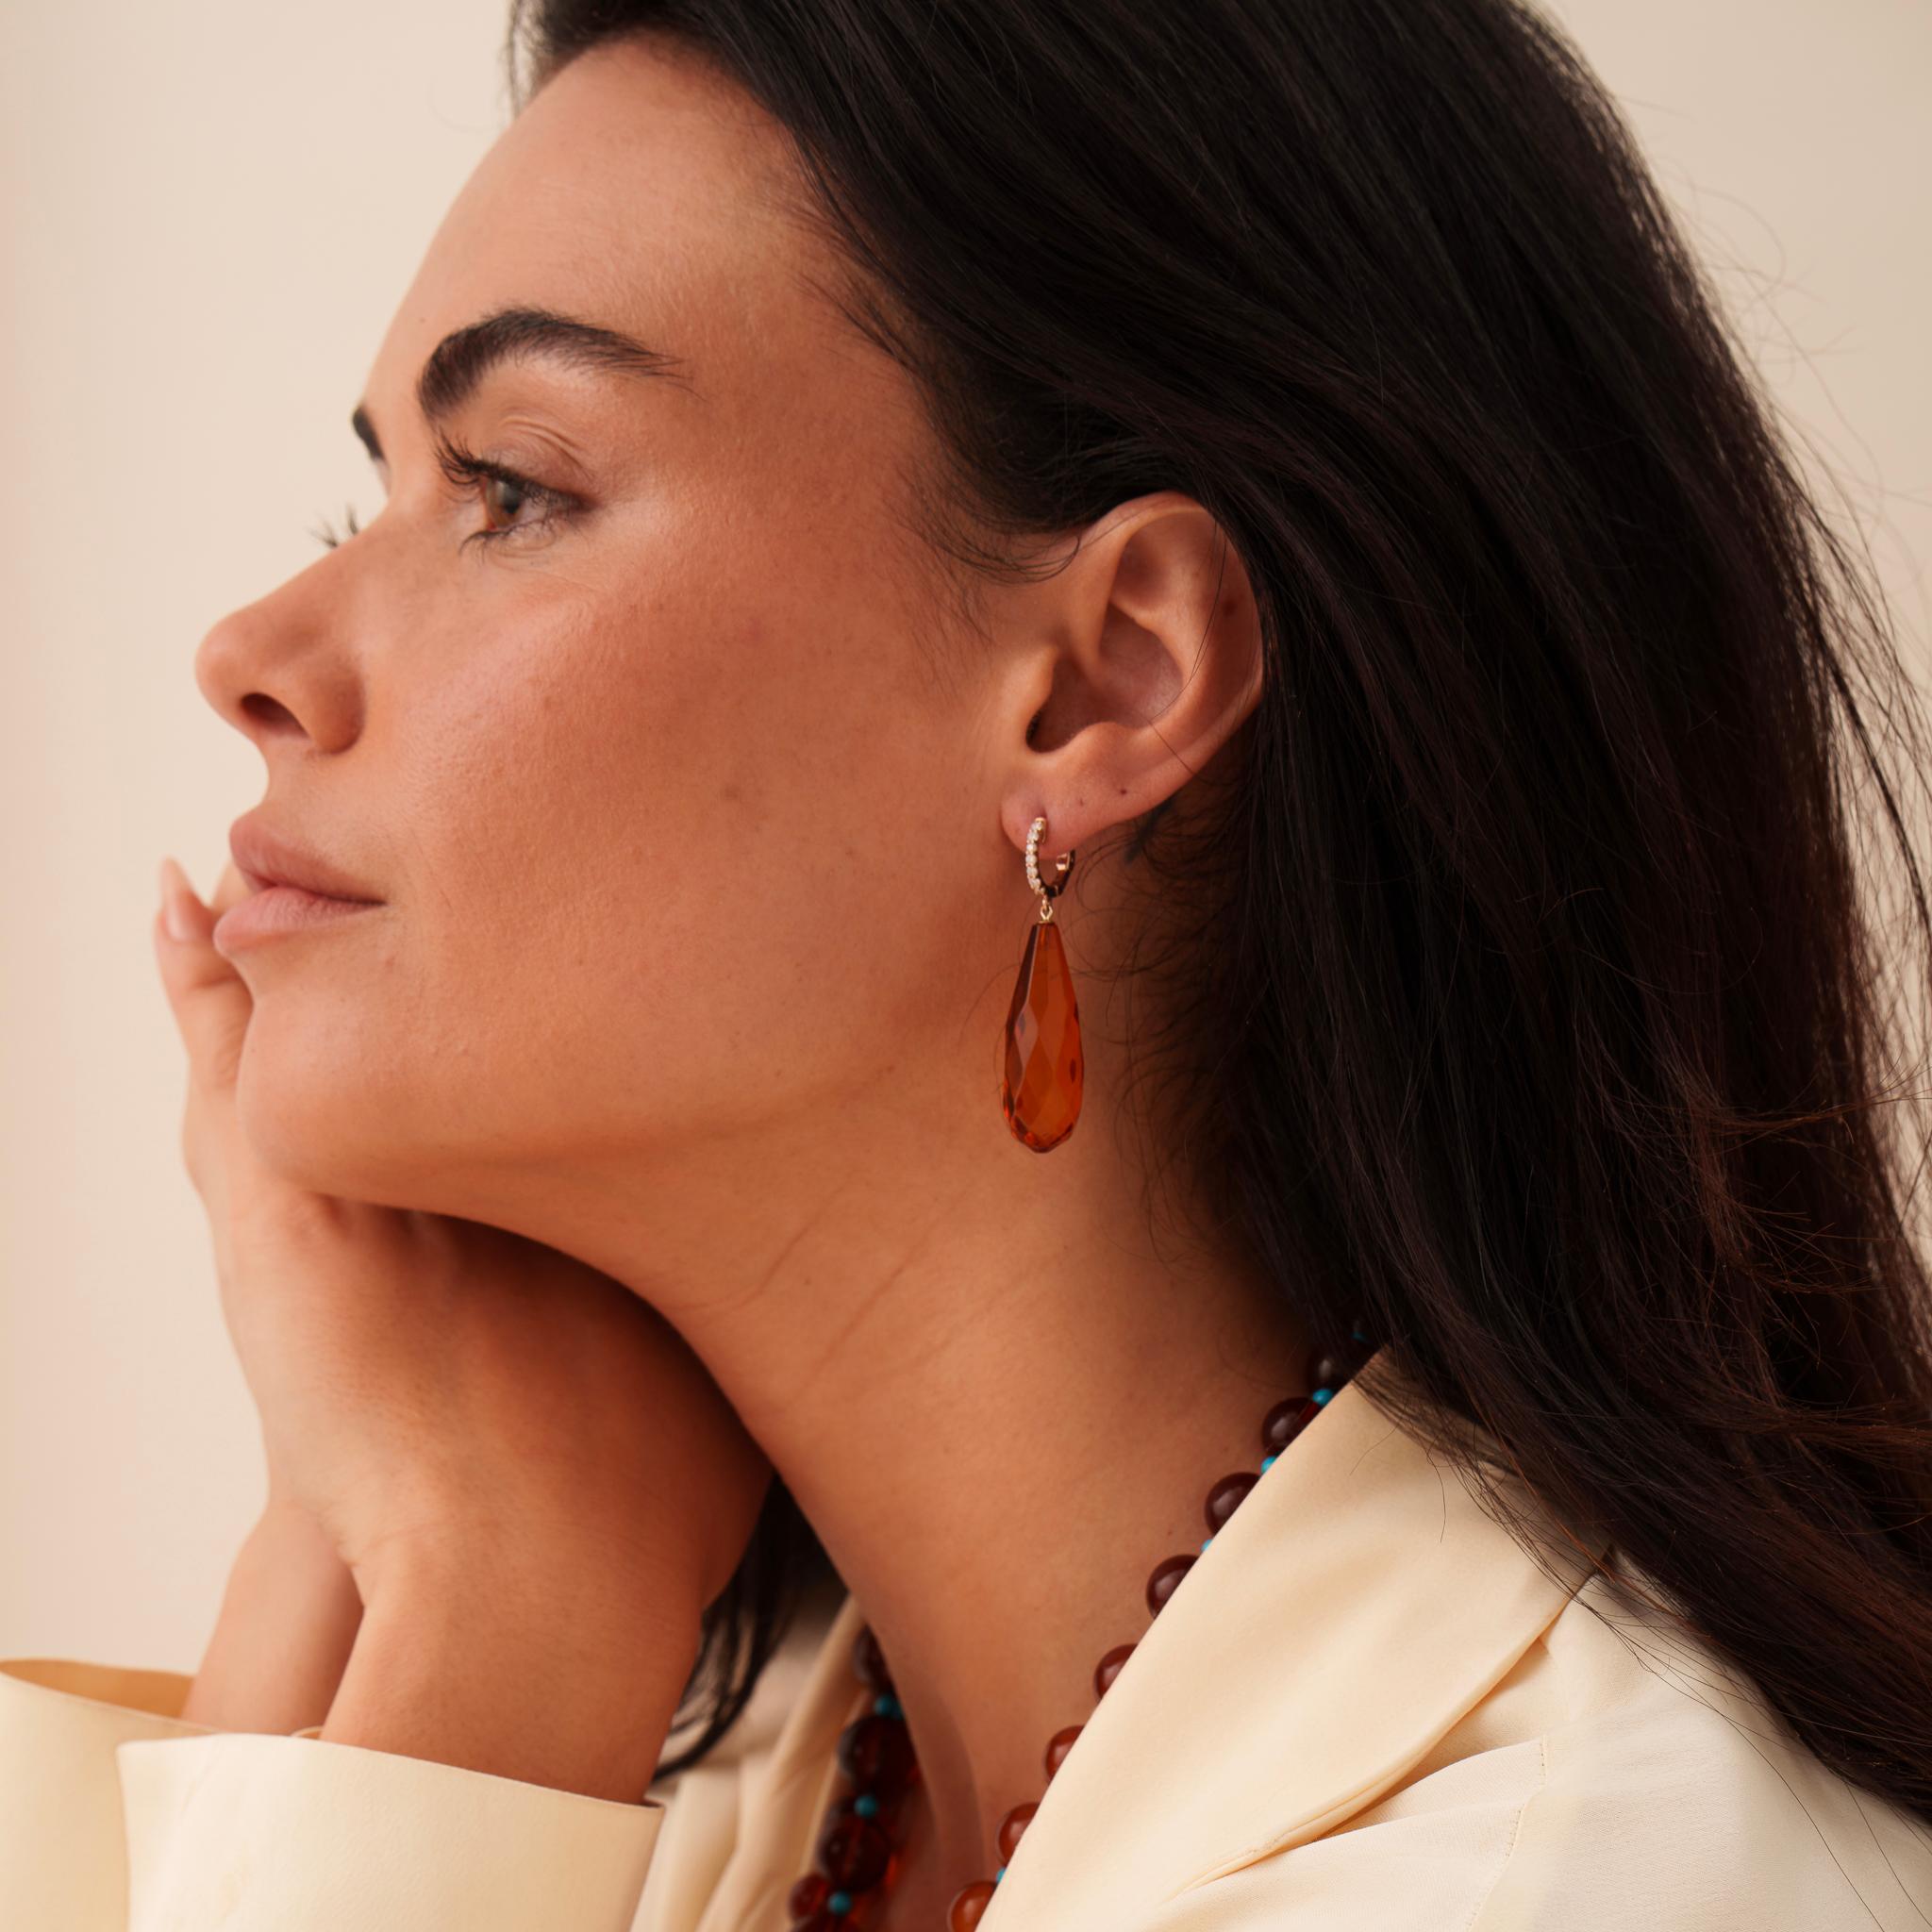 Striking cognac color amber drop earrings, adorned with exquisite diamonds and crafted in a warm rose gold.  The faceting of the amber is simply mesmerizing, catching the eye from every angle.  The earrings are expertly designed to hang gracefully